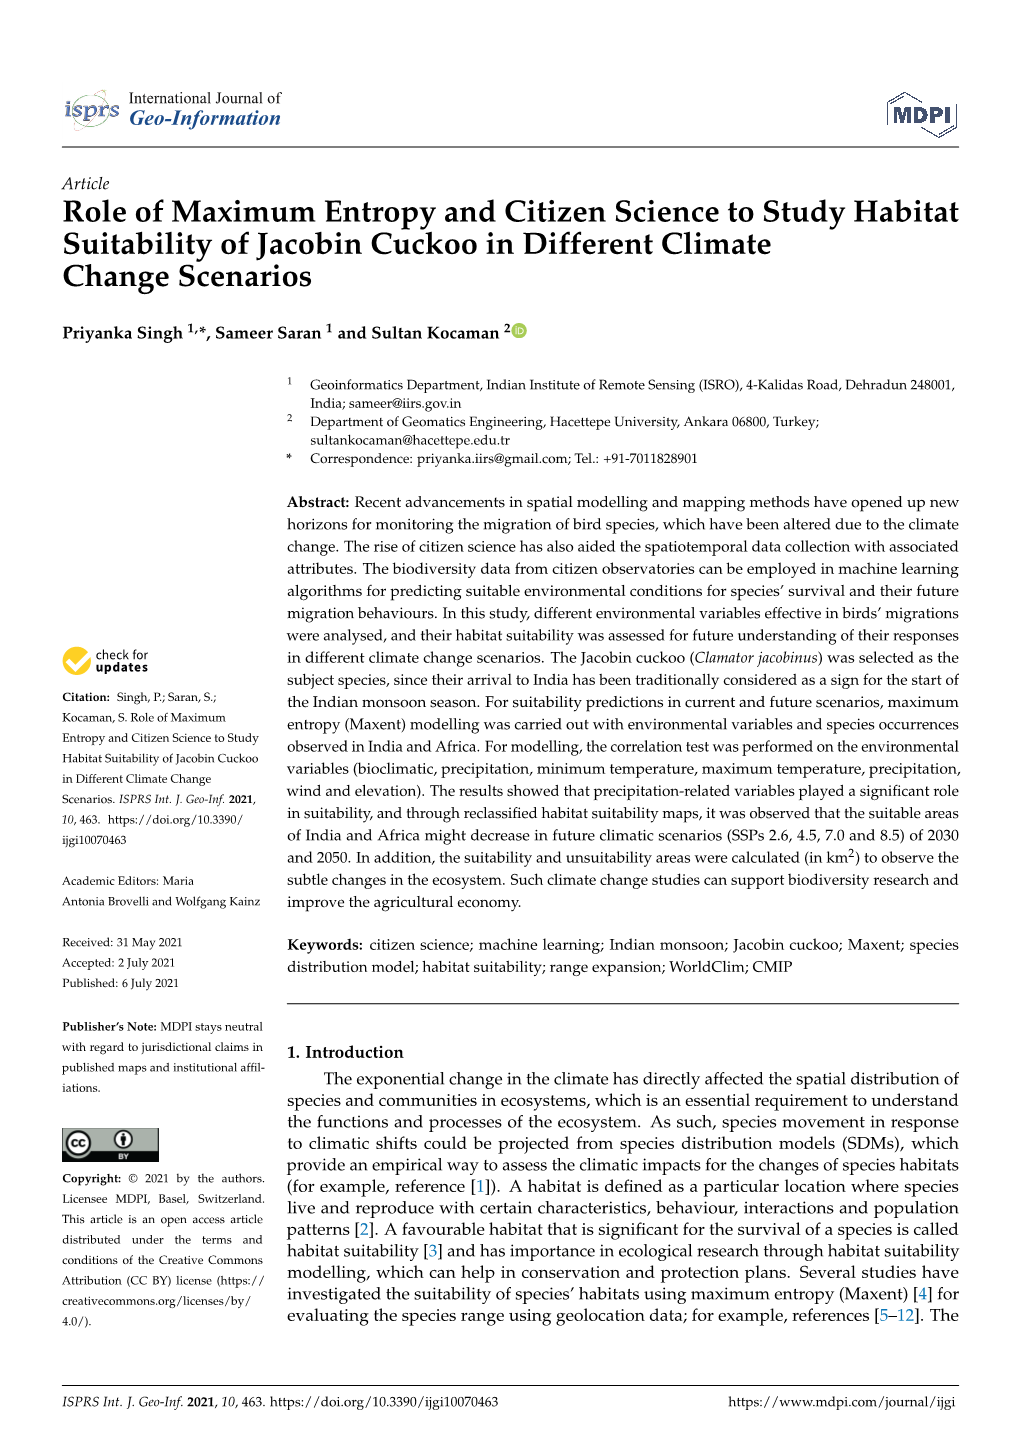 Role of Maximum Entropy and Citizen Science to Study Habitat Suitability of Jacobin Cuckoo in Different Climate Change Scenarios